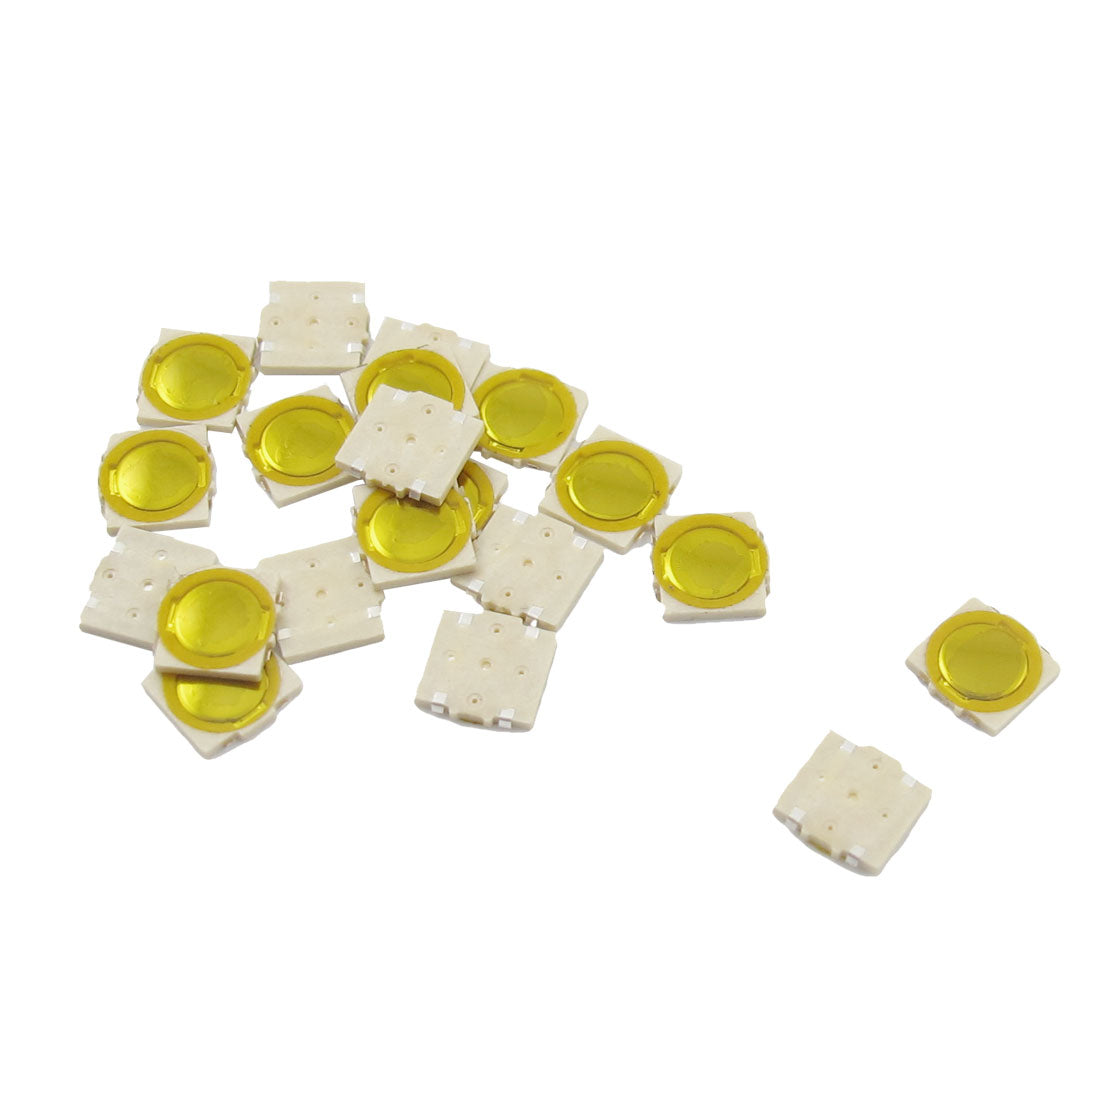 uxcell Uxcell 20 Pcs Momentary Tact Switch SMT Surface Mounted Devices Ultrathin Tactile Switches 5x5mm